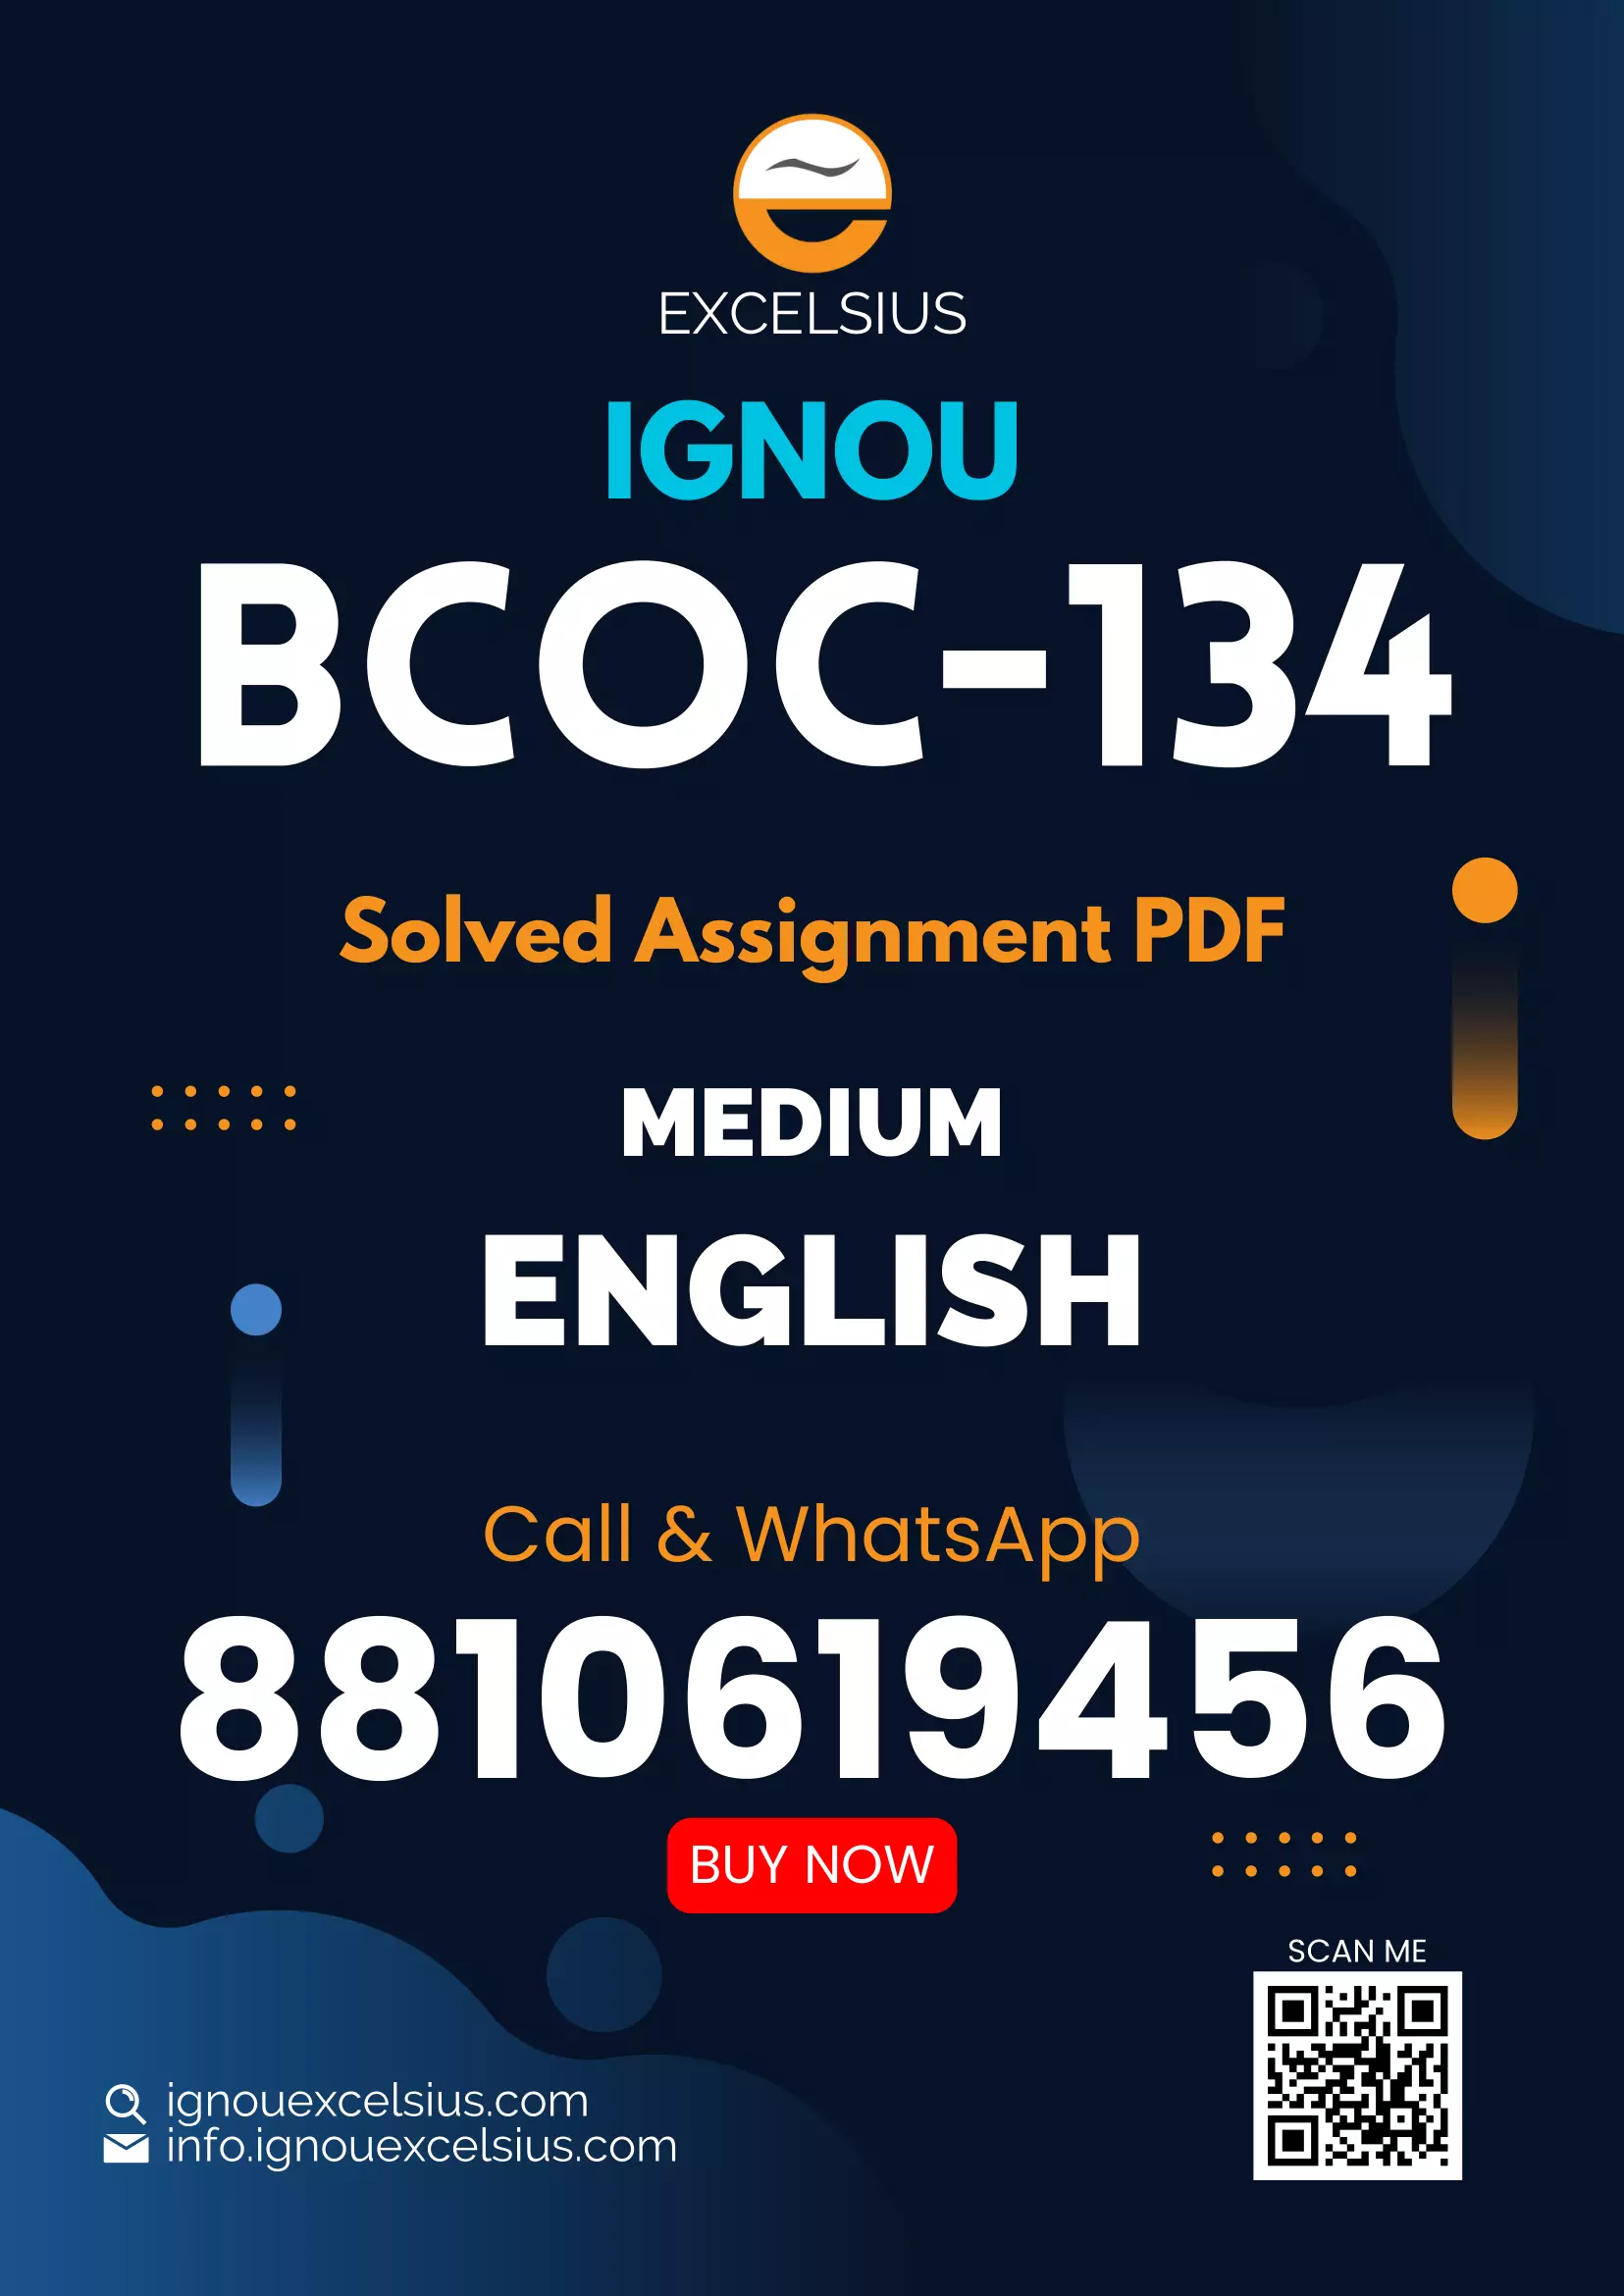 IGNOU BCOC-134 - Business Mathematics and Statistics, Latest Solved Assignment-January 2023 - December 2023